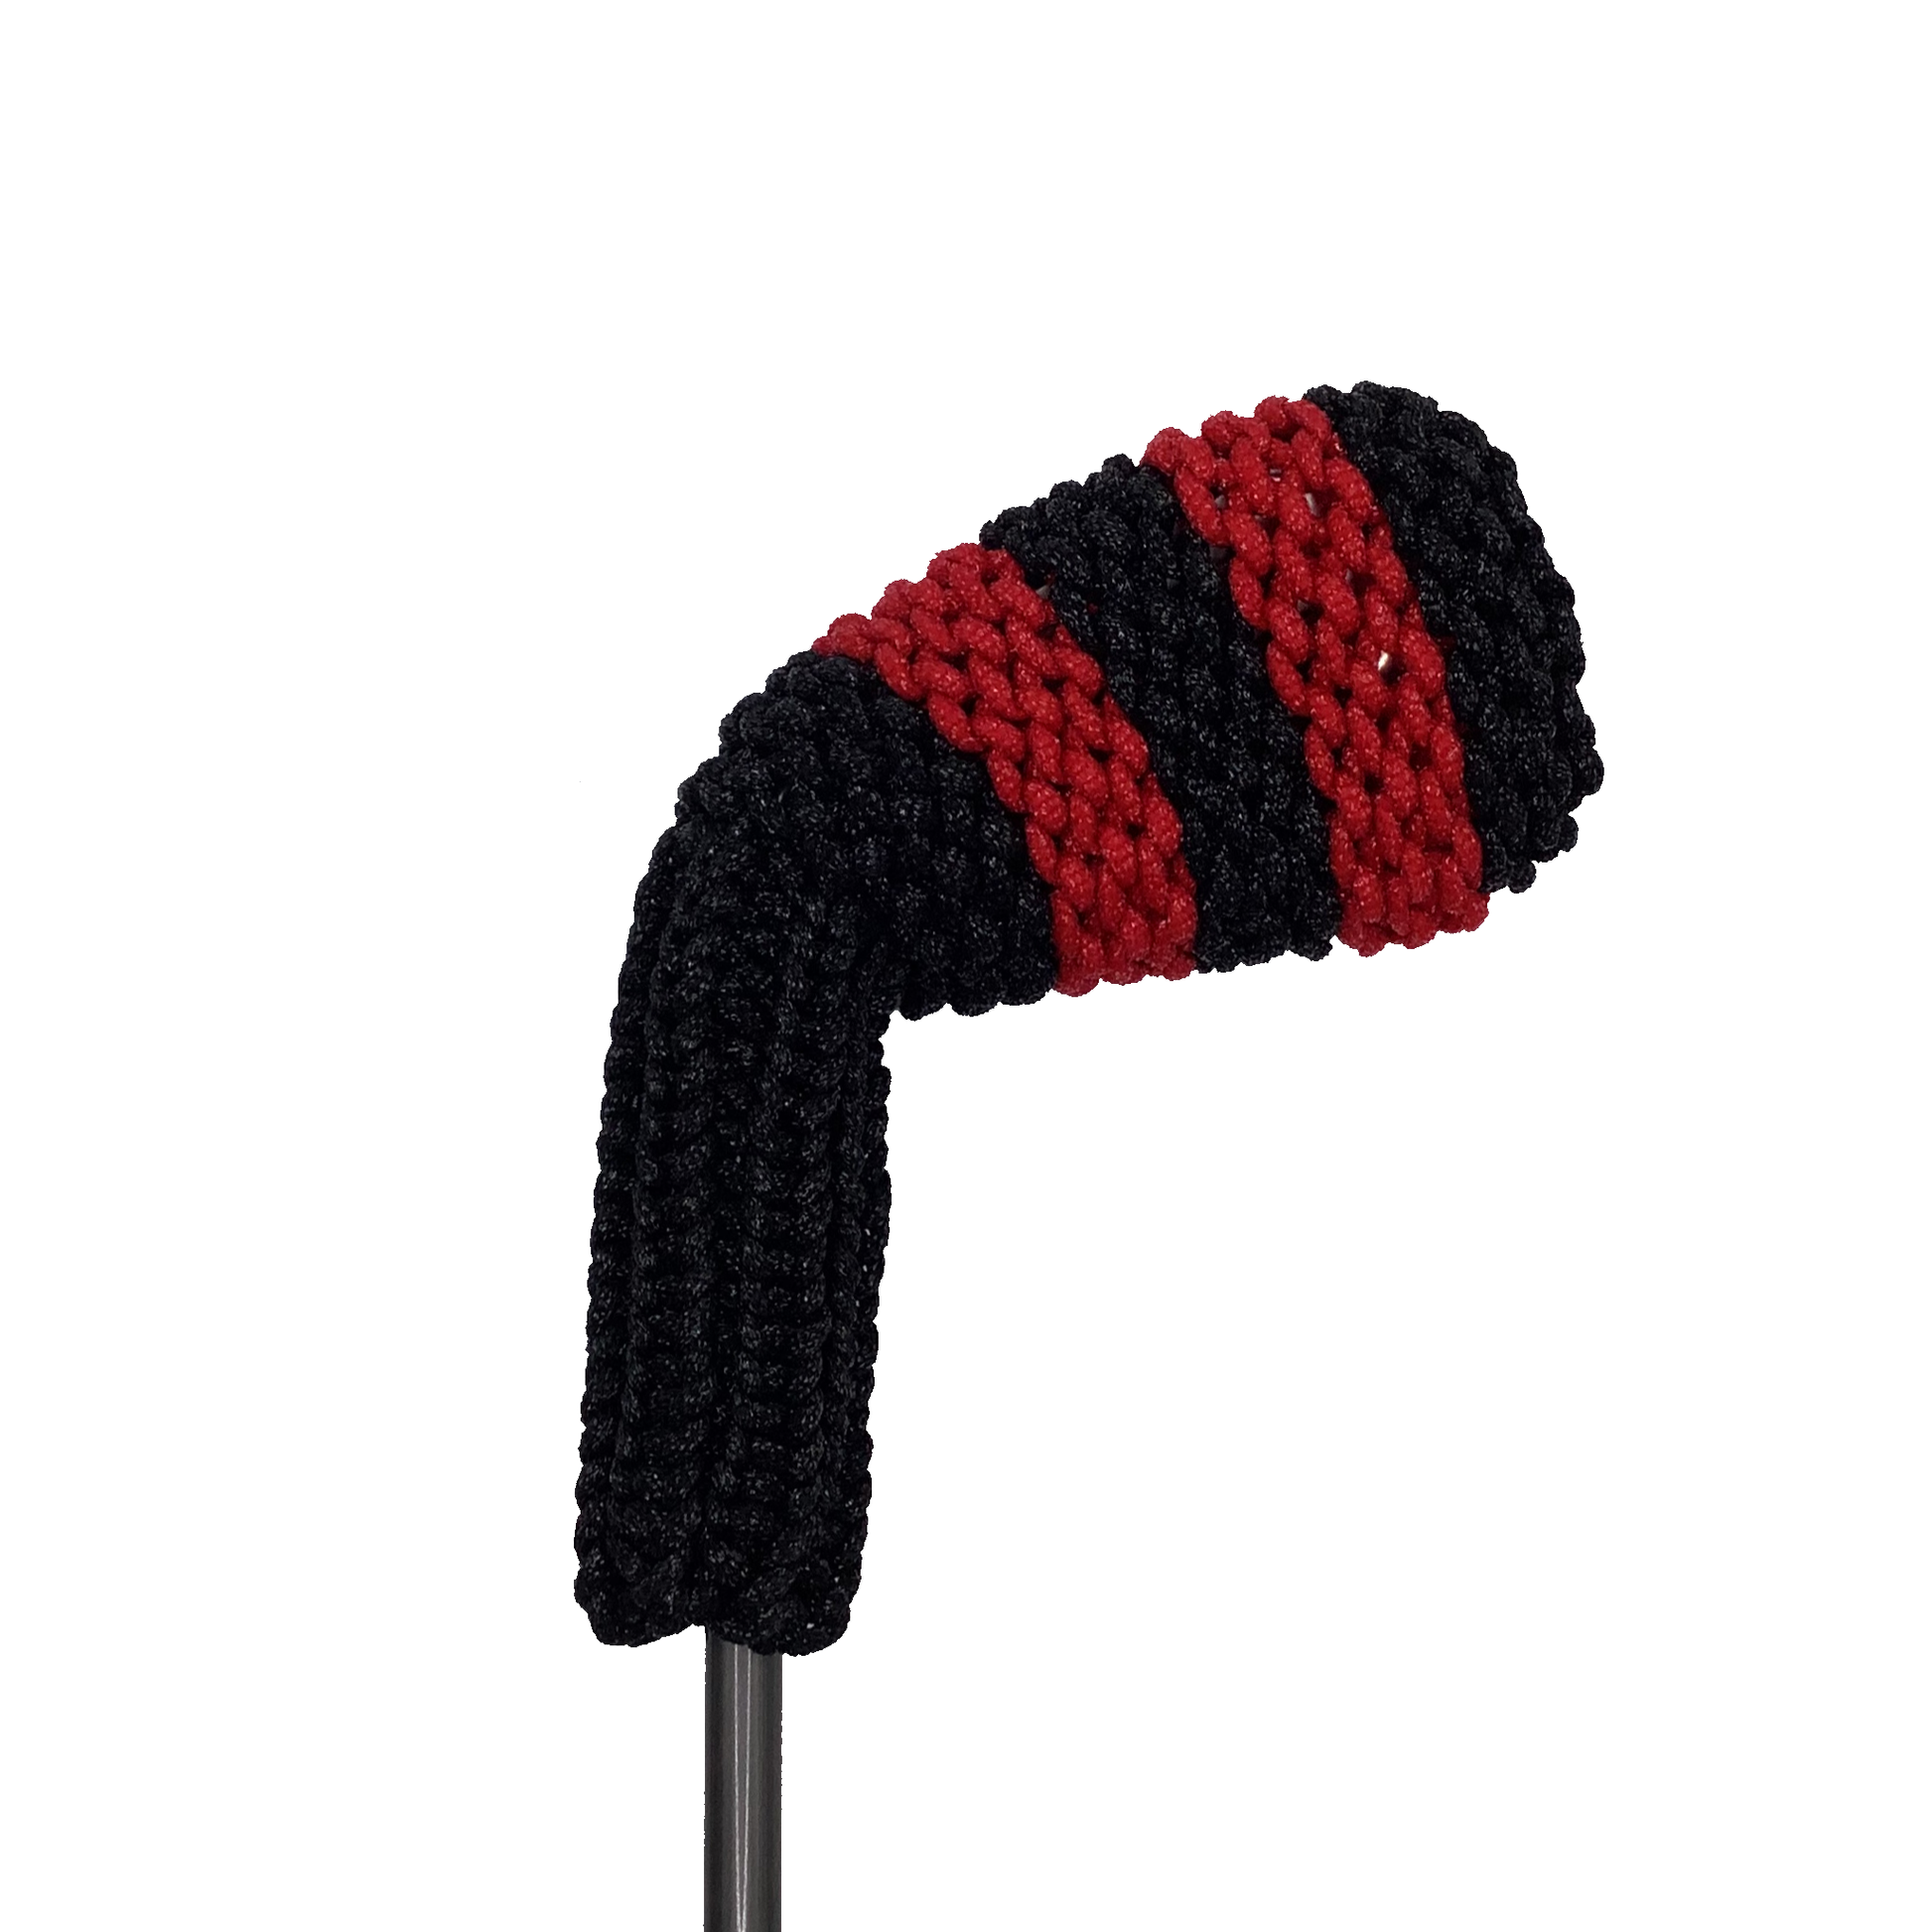 Clean Shot™ iron headcover in black with large size red stripes. Perfect for a wedge or other iron.